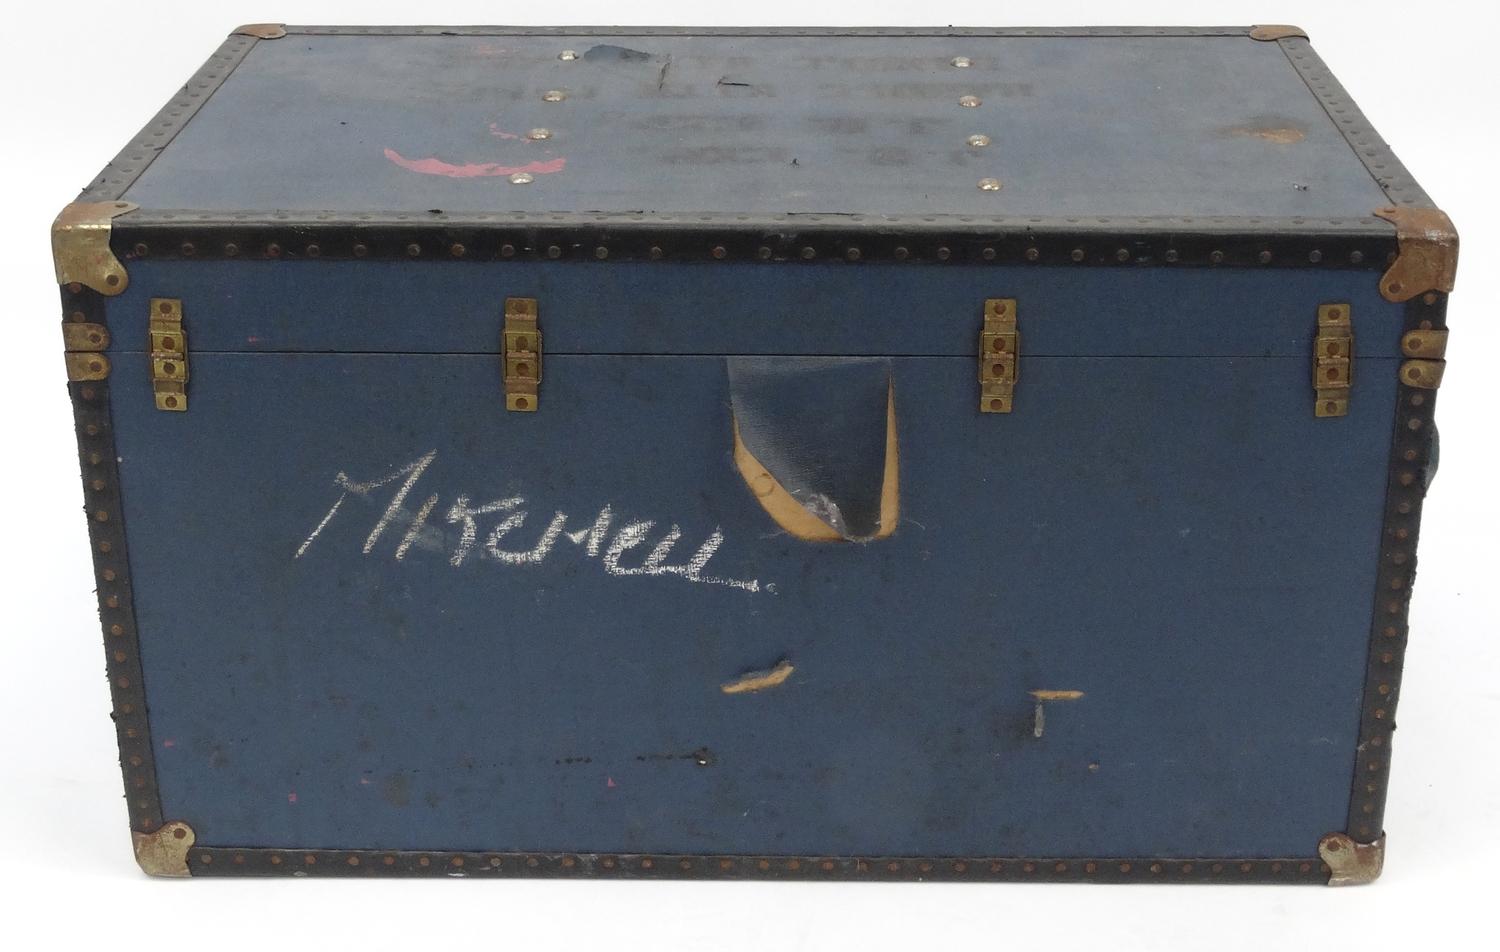 Jimi Hendrix Experience touring trunk, stencilled 'J.H. Exp Handle With Care' and shipping label - Image 10 of 10